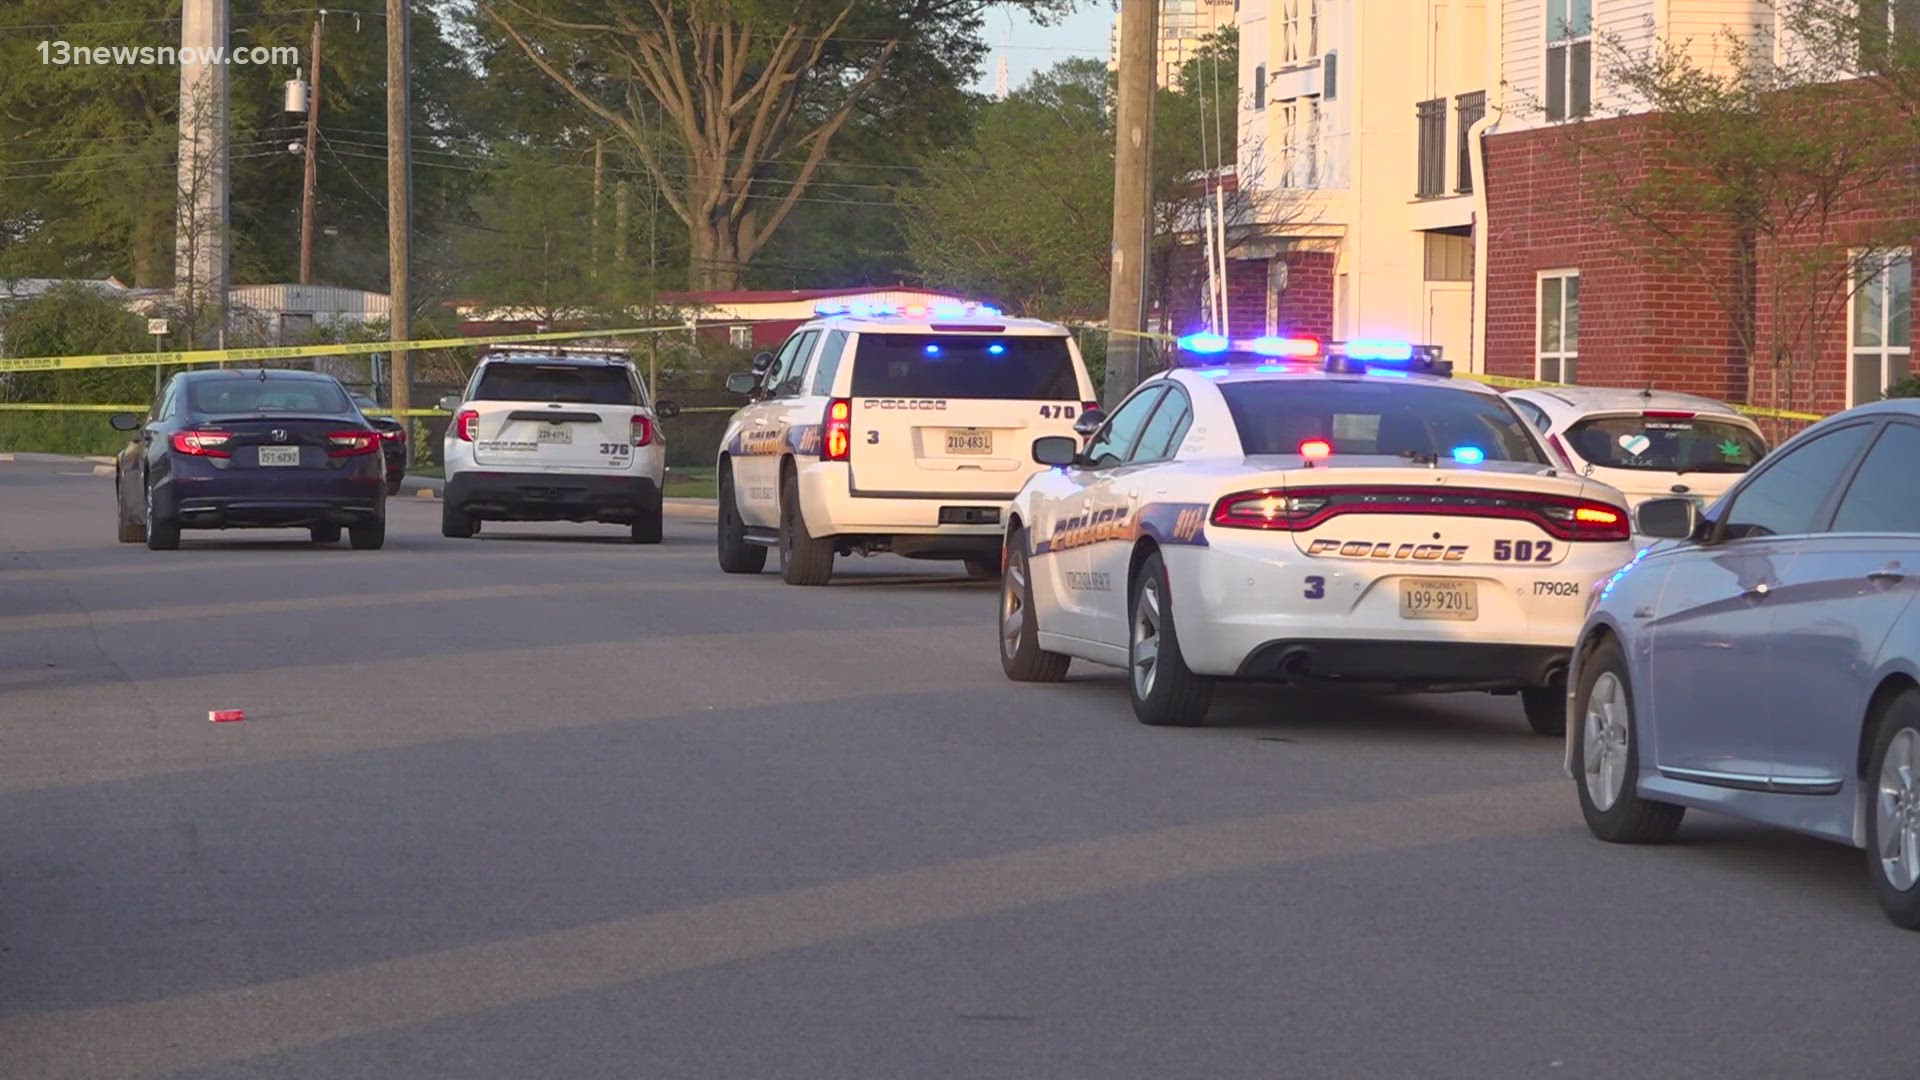 A man is in critical condition after a shooting in after a shooting in Virginia Beach on Sunday afternoon, police say.